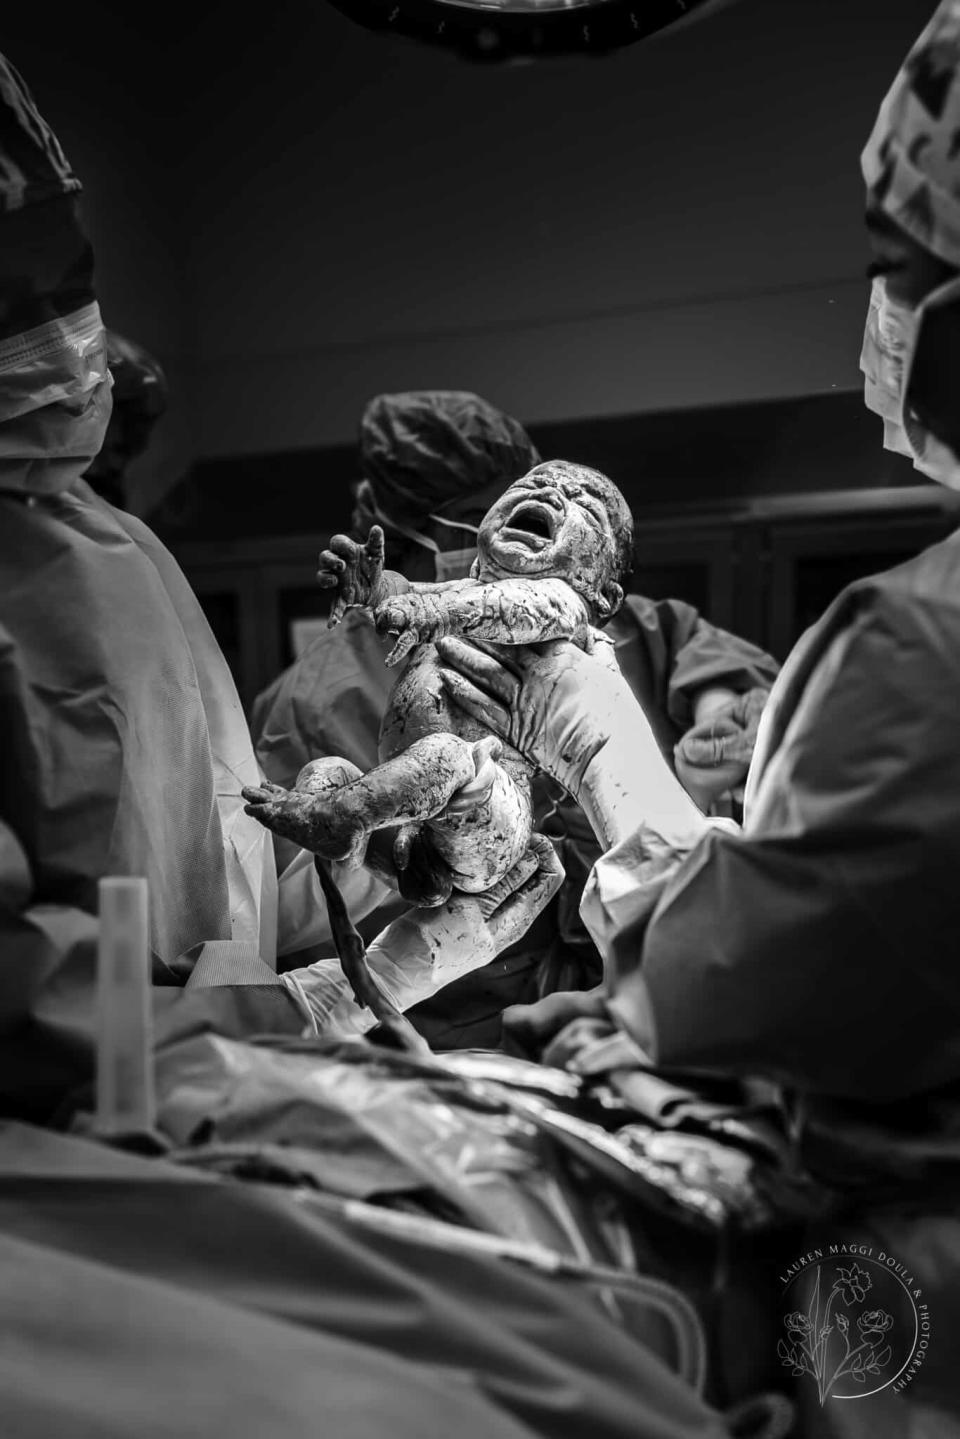 Newborn held up by medical staff during a delivery in an operating room